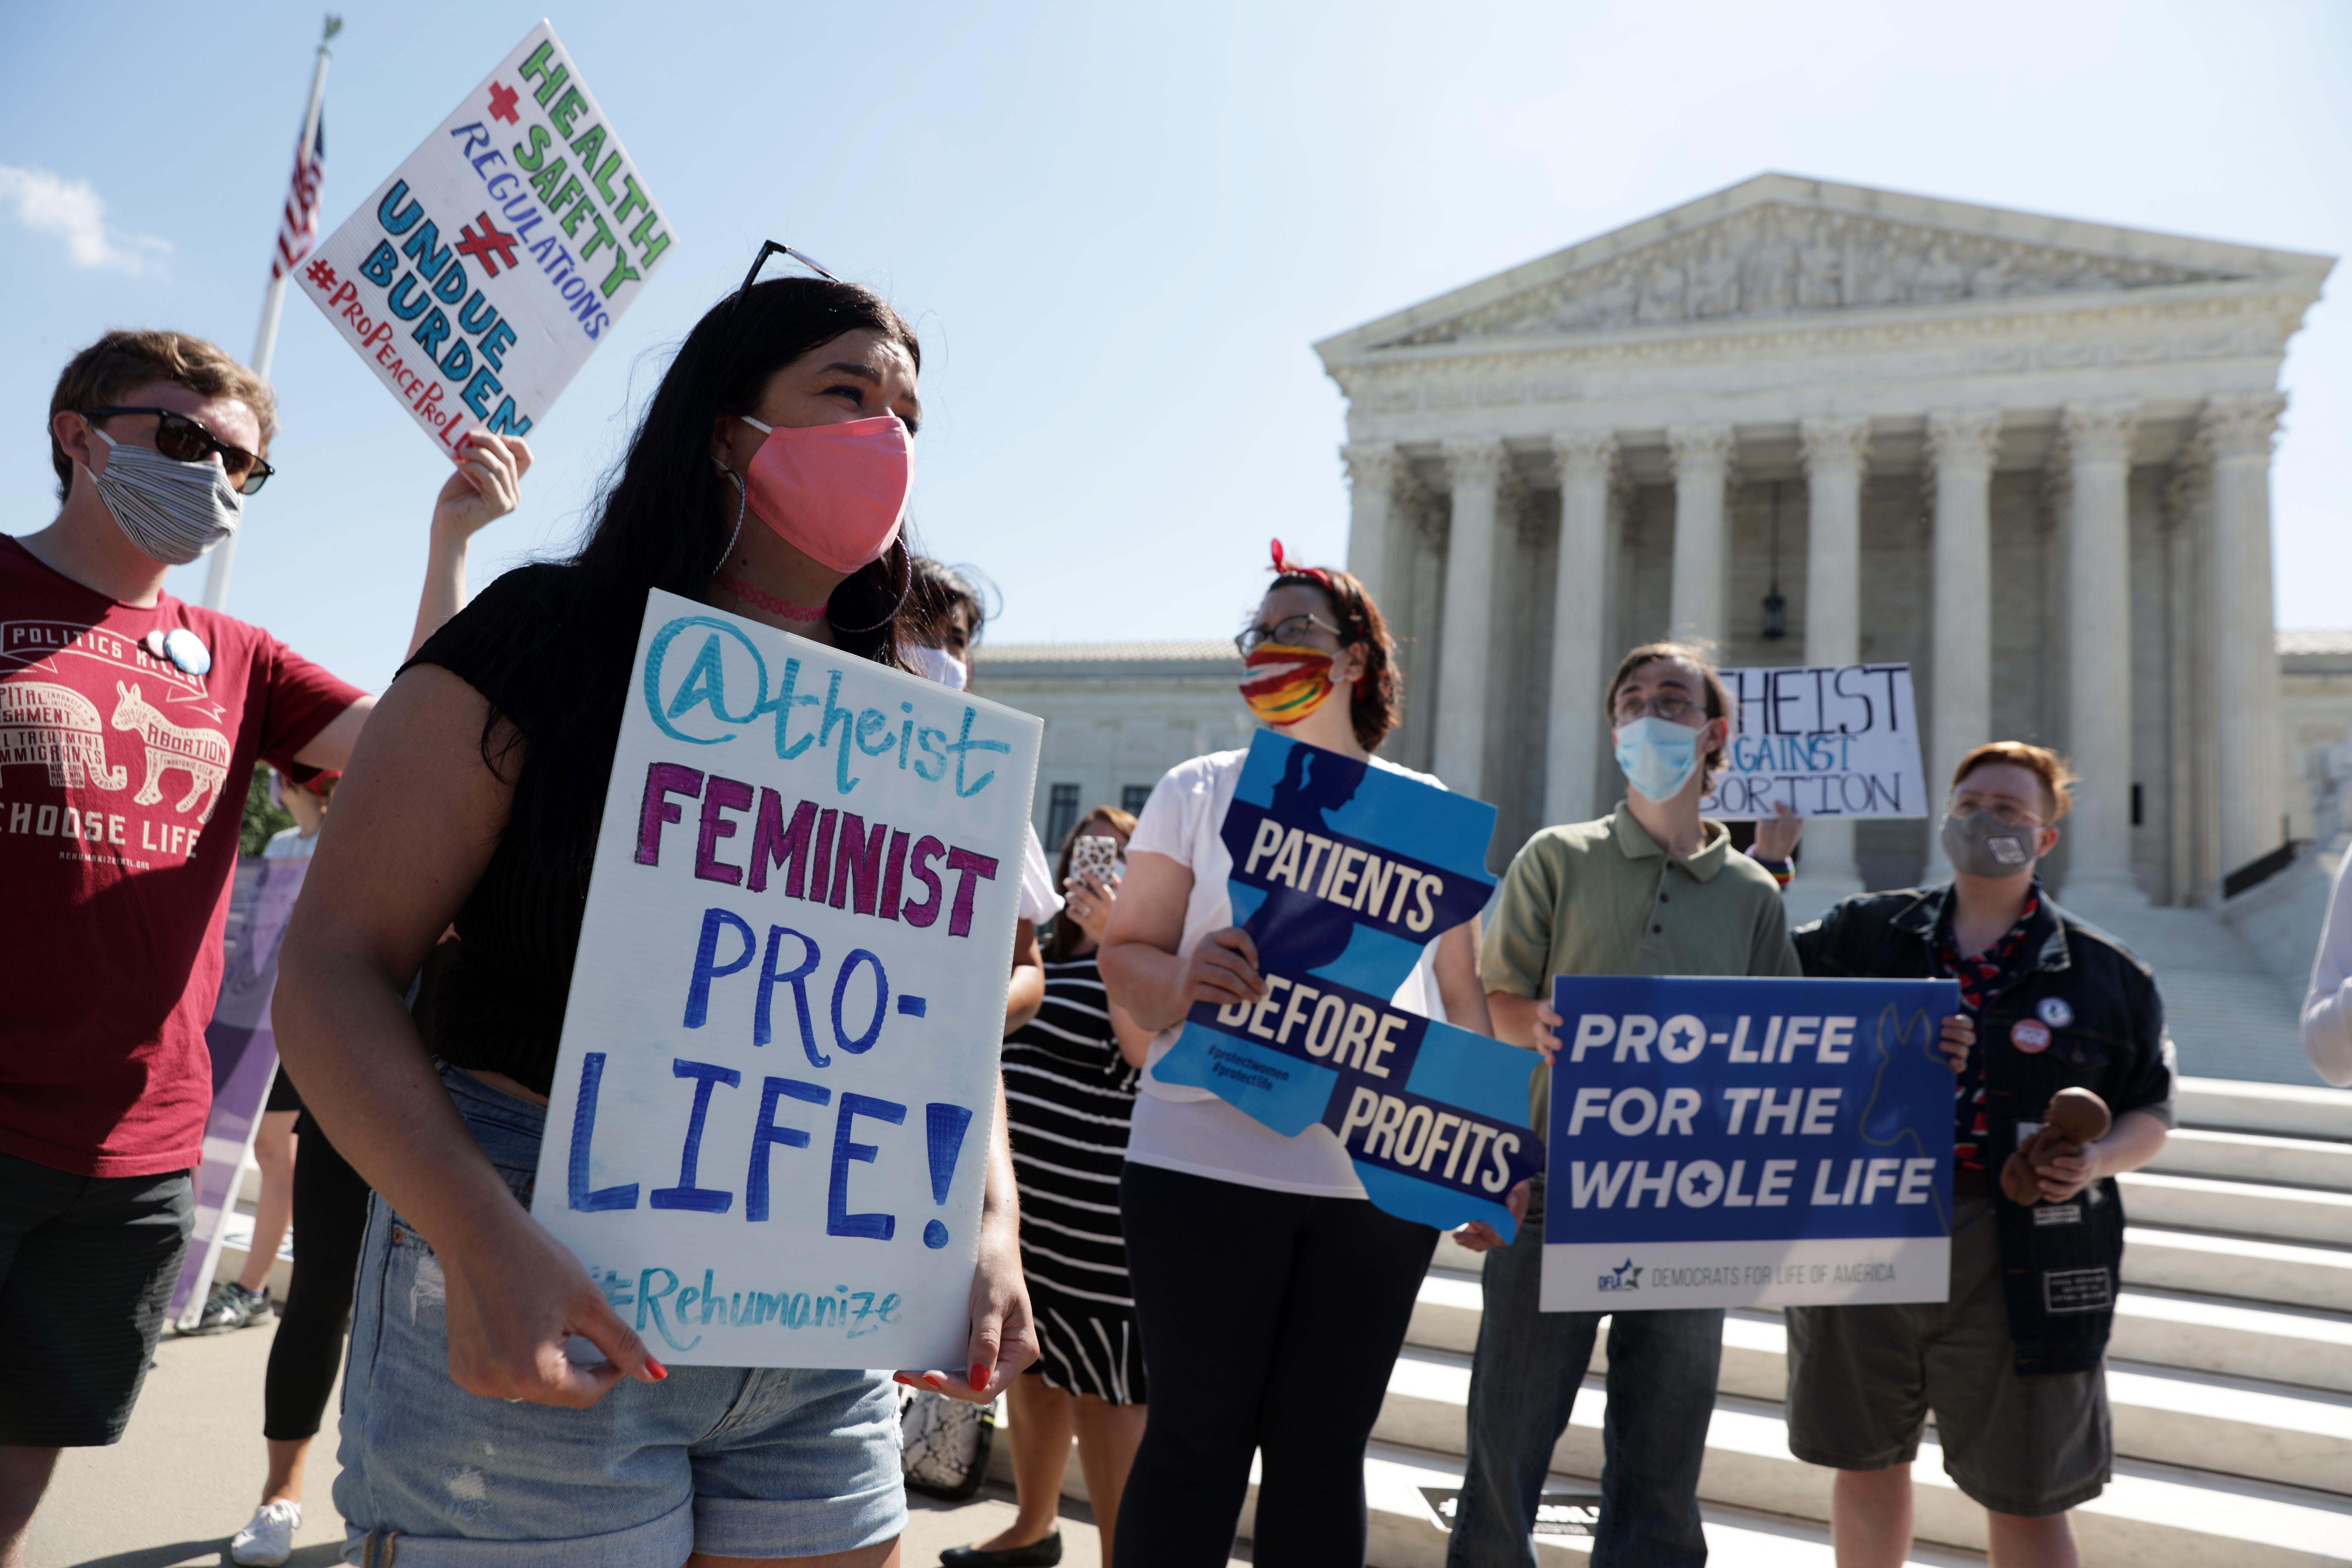 Pro-life activists participate in a demonstration in front of the U.S. Supreme Court June 29, 2020 in Washington, DC. The Supreme Court has ruled today, in a 5-4 decision, a Louisiana law that required abortion doctors need admitting privileges to nearby hospitals unconstitutional.  (Photo by Alex Wong/Getty Images)